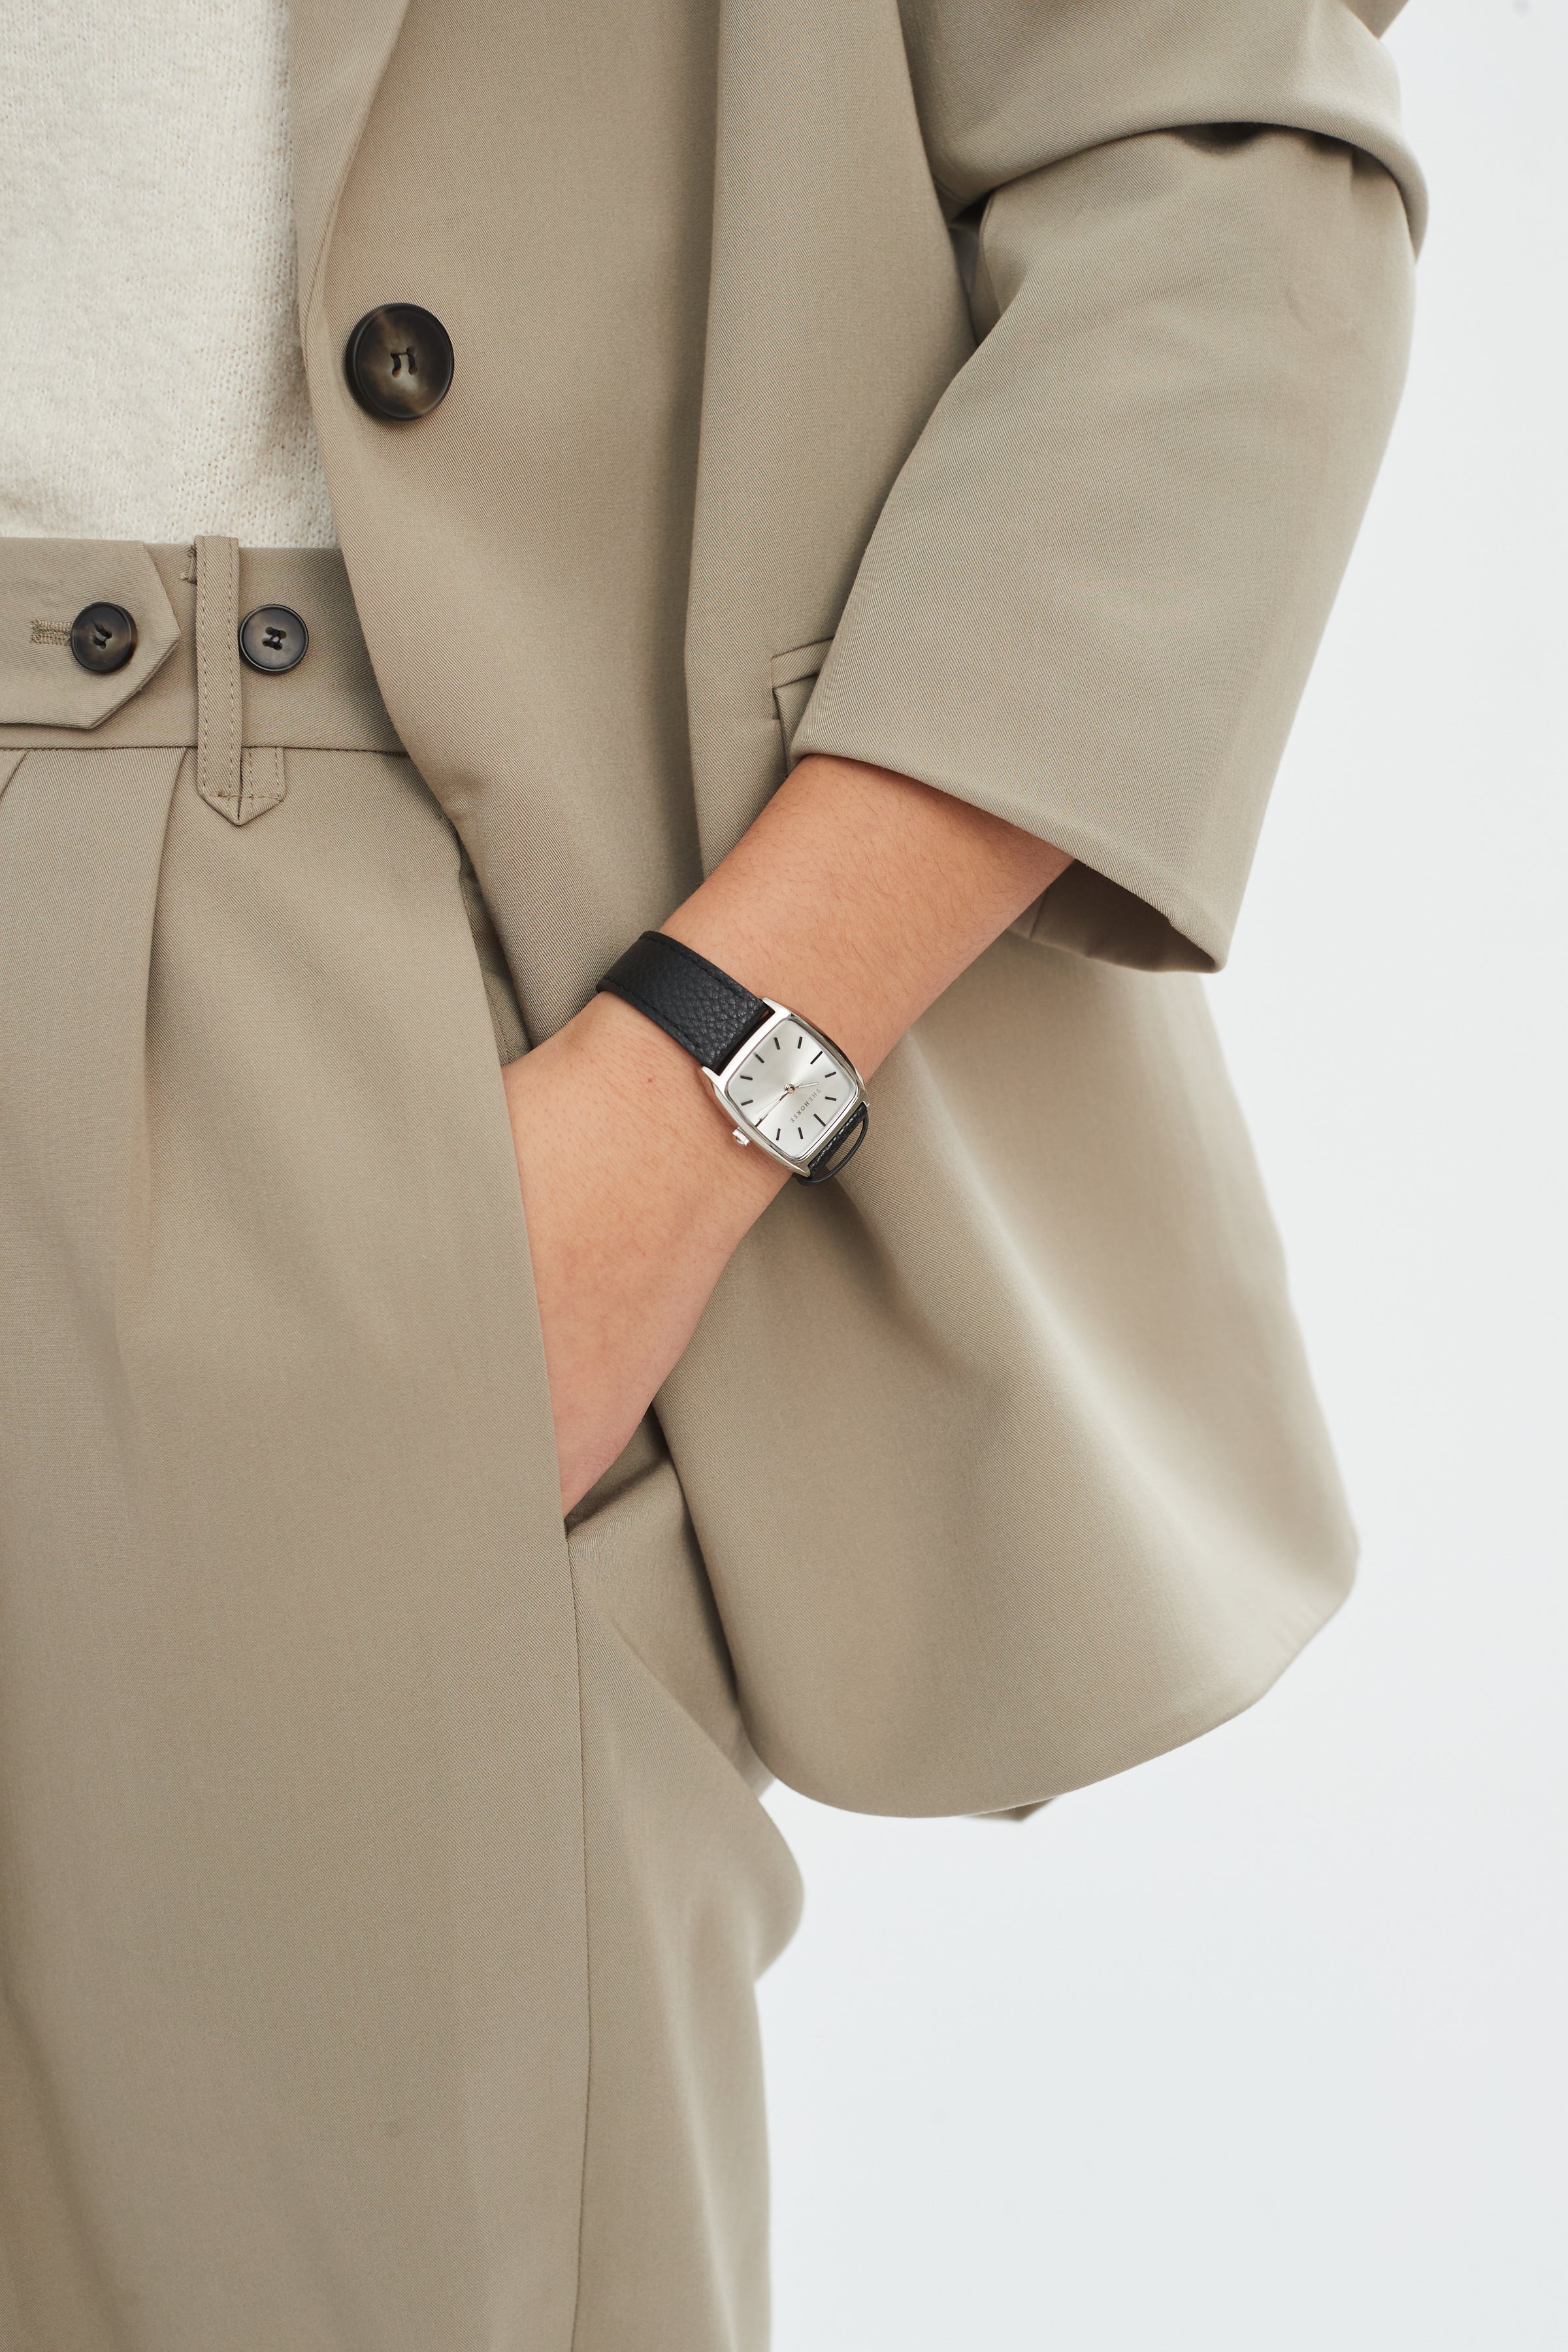 The Dress Watch: Polished Silver / Sunray Dial / Black Leather